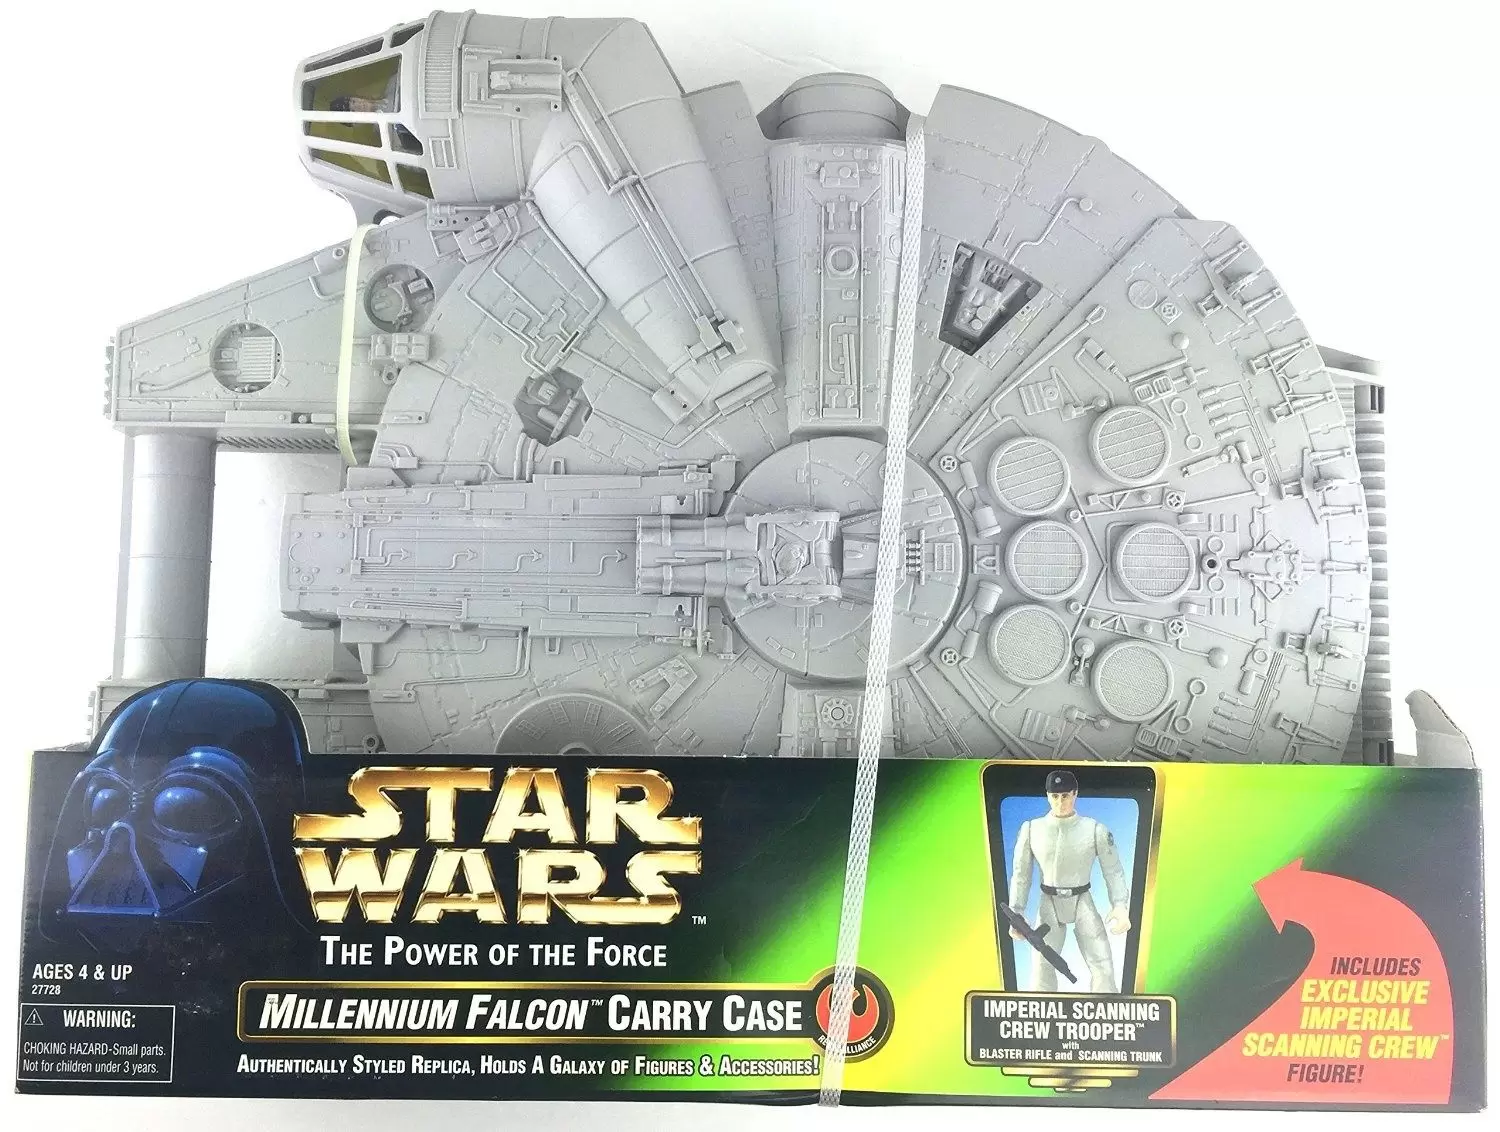 Power of the Force 2 - Millennium Falcon Carry Case + Imperial Scanning Crew Trooper